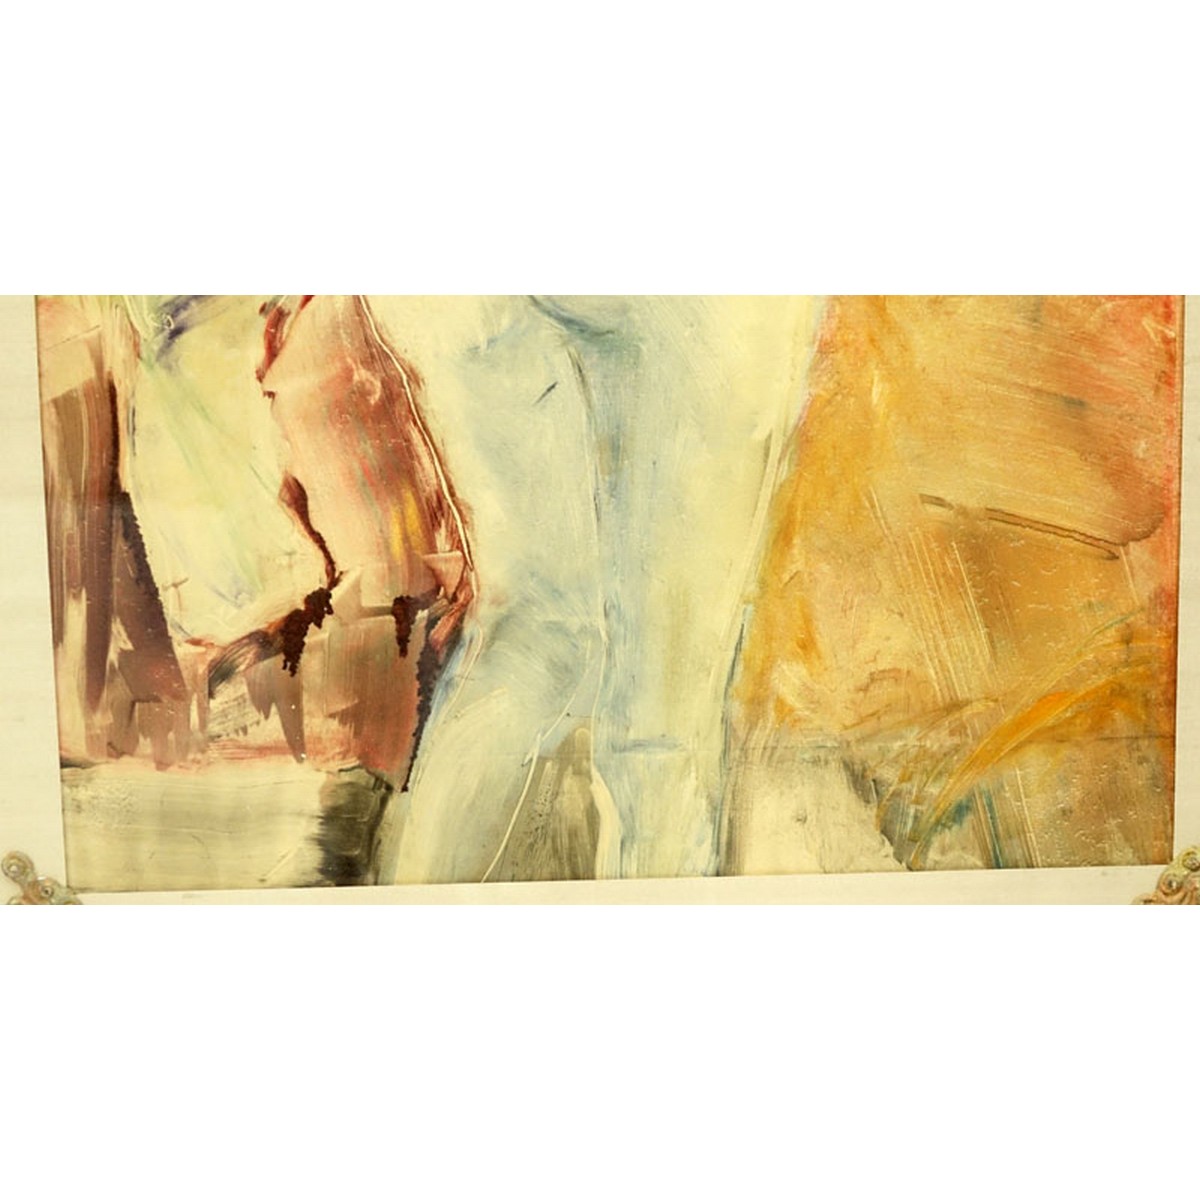 Large Modern Watercolor on Paper, Nude in Interior Scene, Unsigned. Good condition.